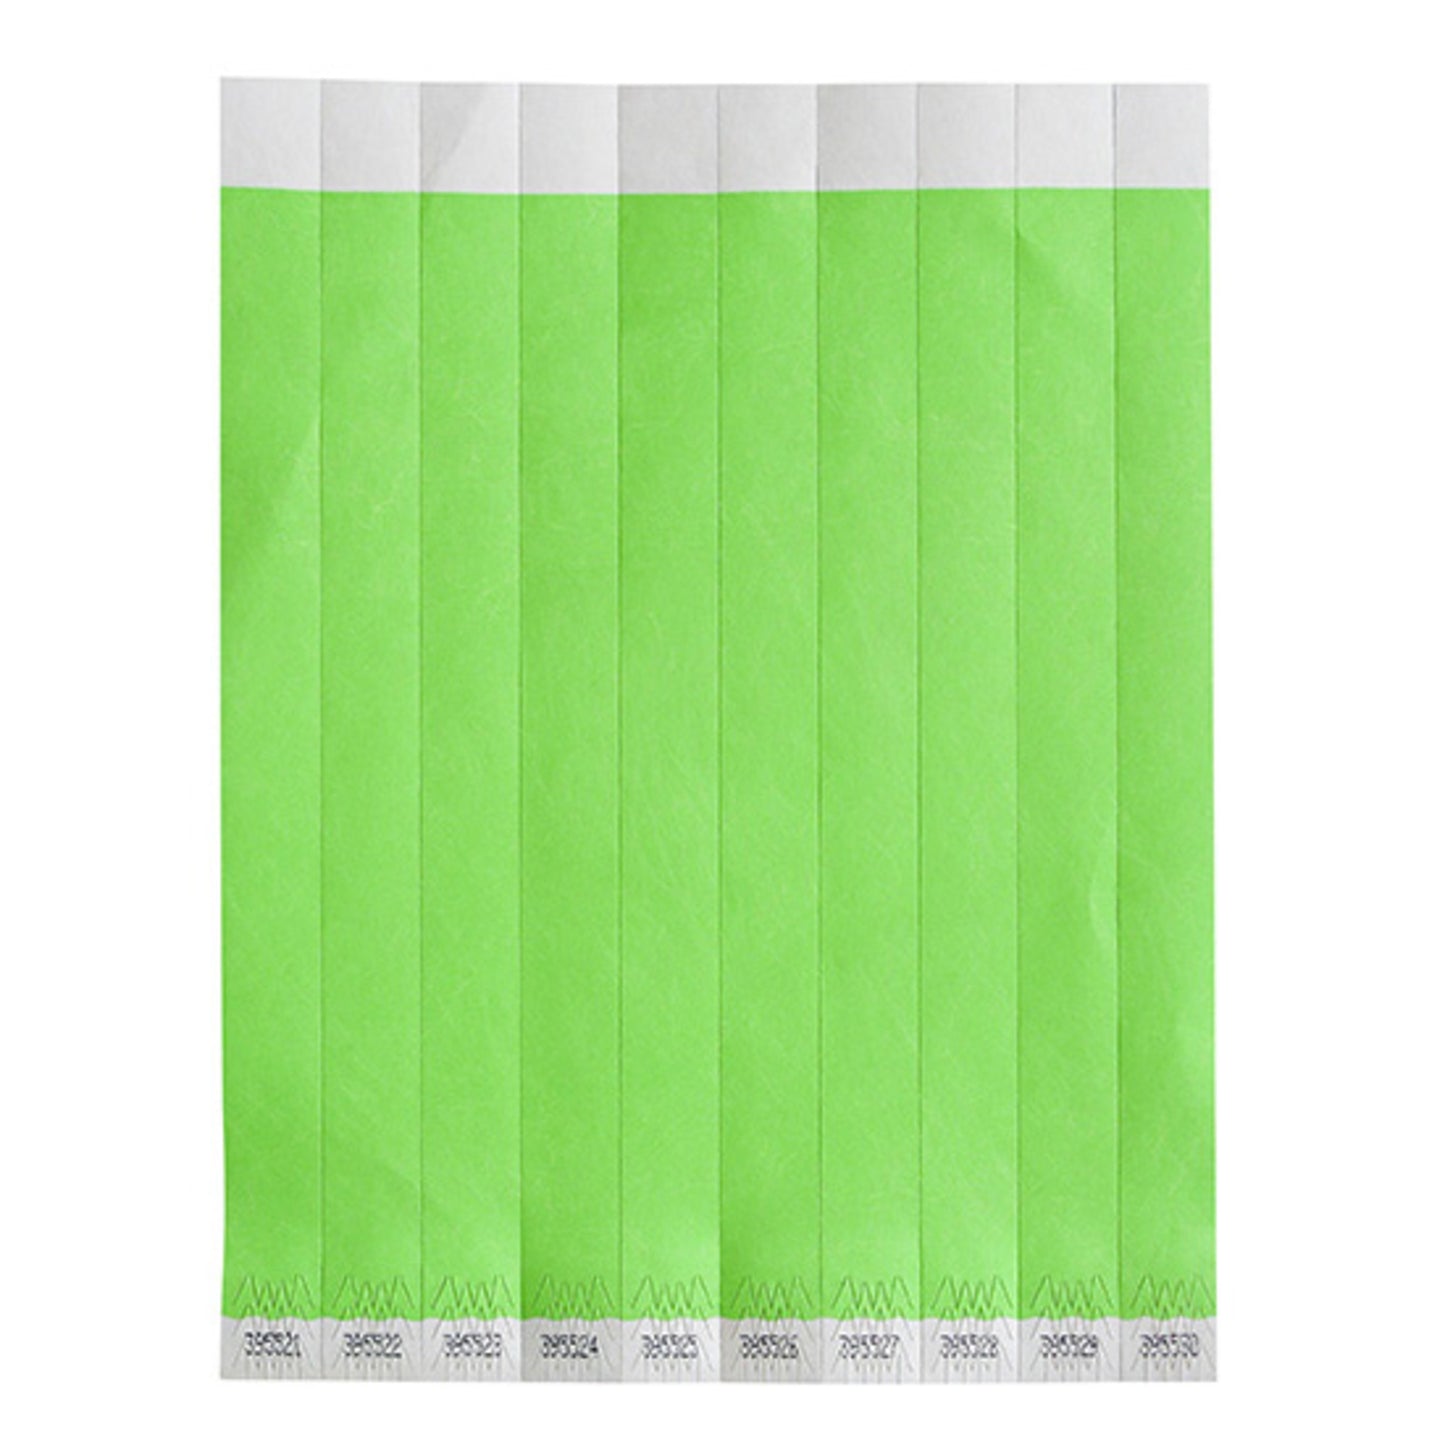 WB-100G-S - Bar Maid Waterproof Tear-Free Wristbands - Green Solid (500 Pieces/Pack)